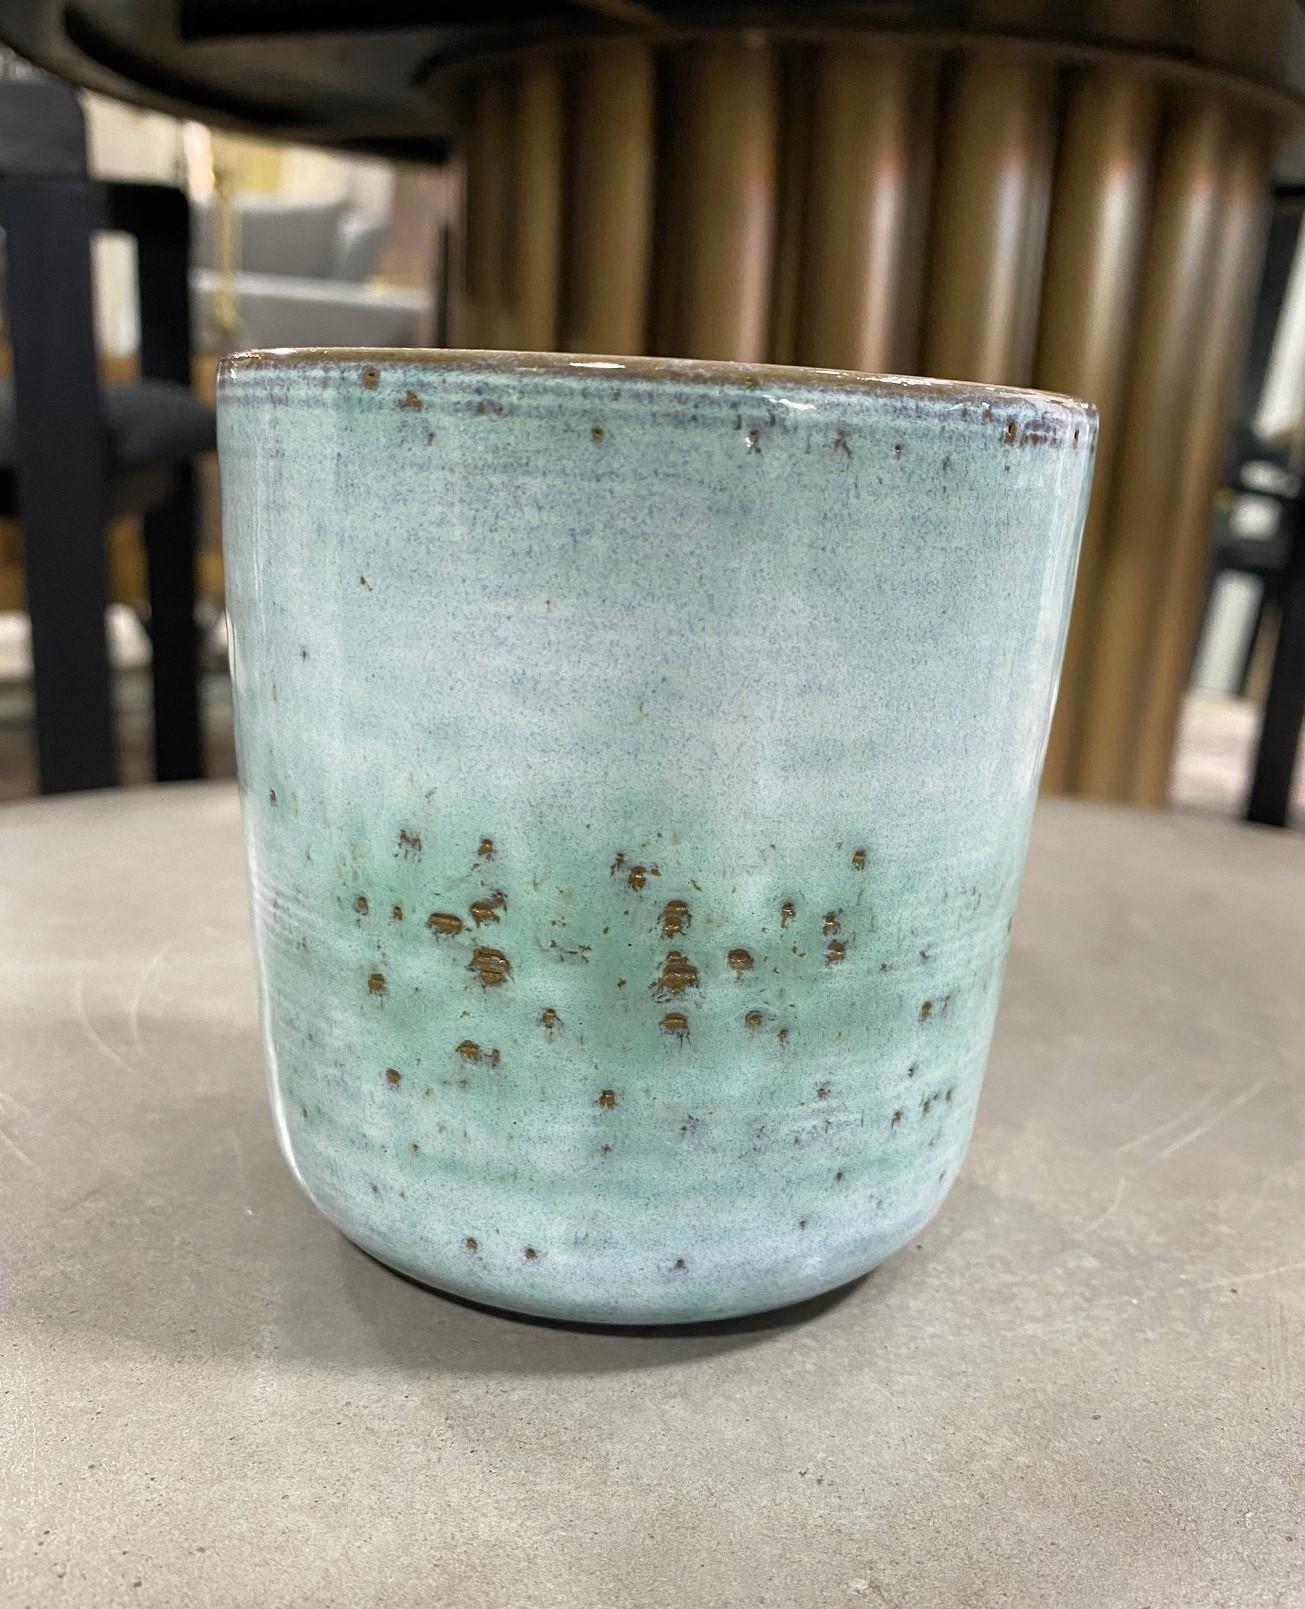 A gorgeous eggshell blue sumptuously glazed vase/ vessel by California master ceramist Rupert Deese who worked closely with pottery legend Harrison Mcintosh.

Signed with his cipher on the base.

Would be a great addition to any Mid-Century